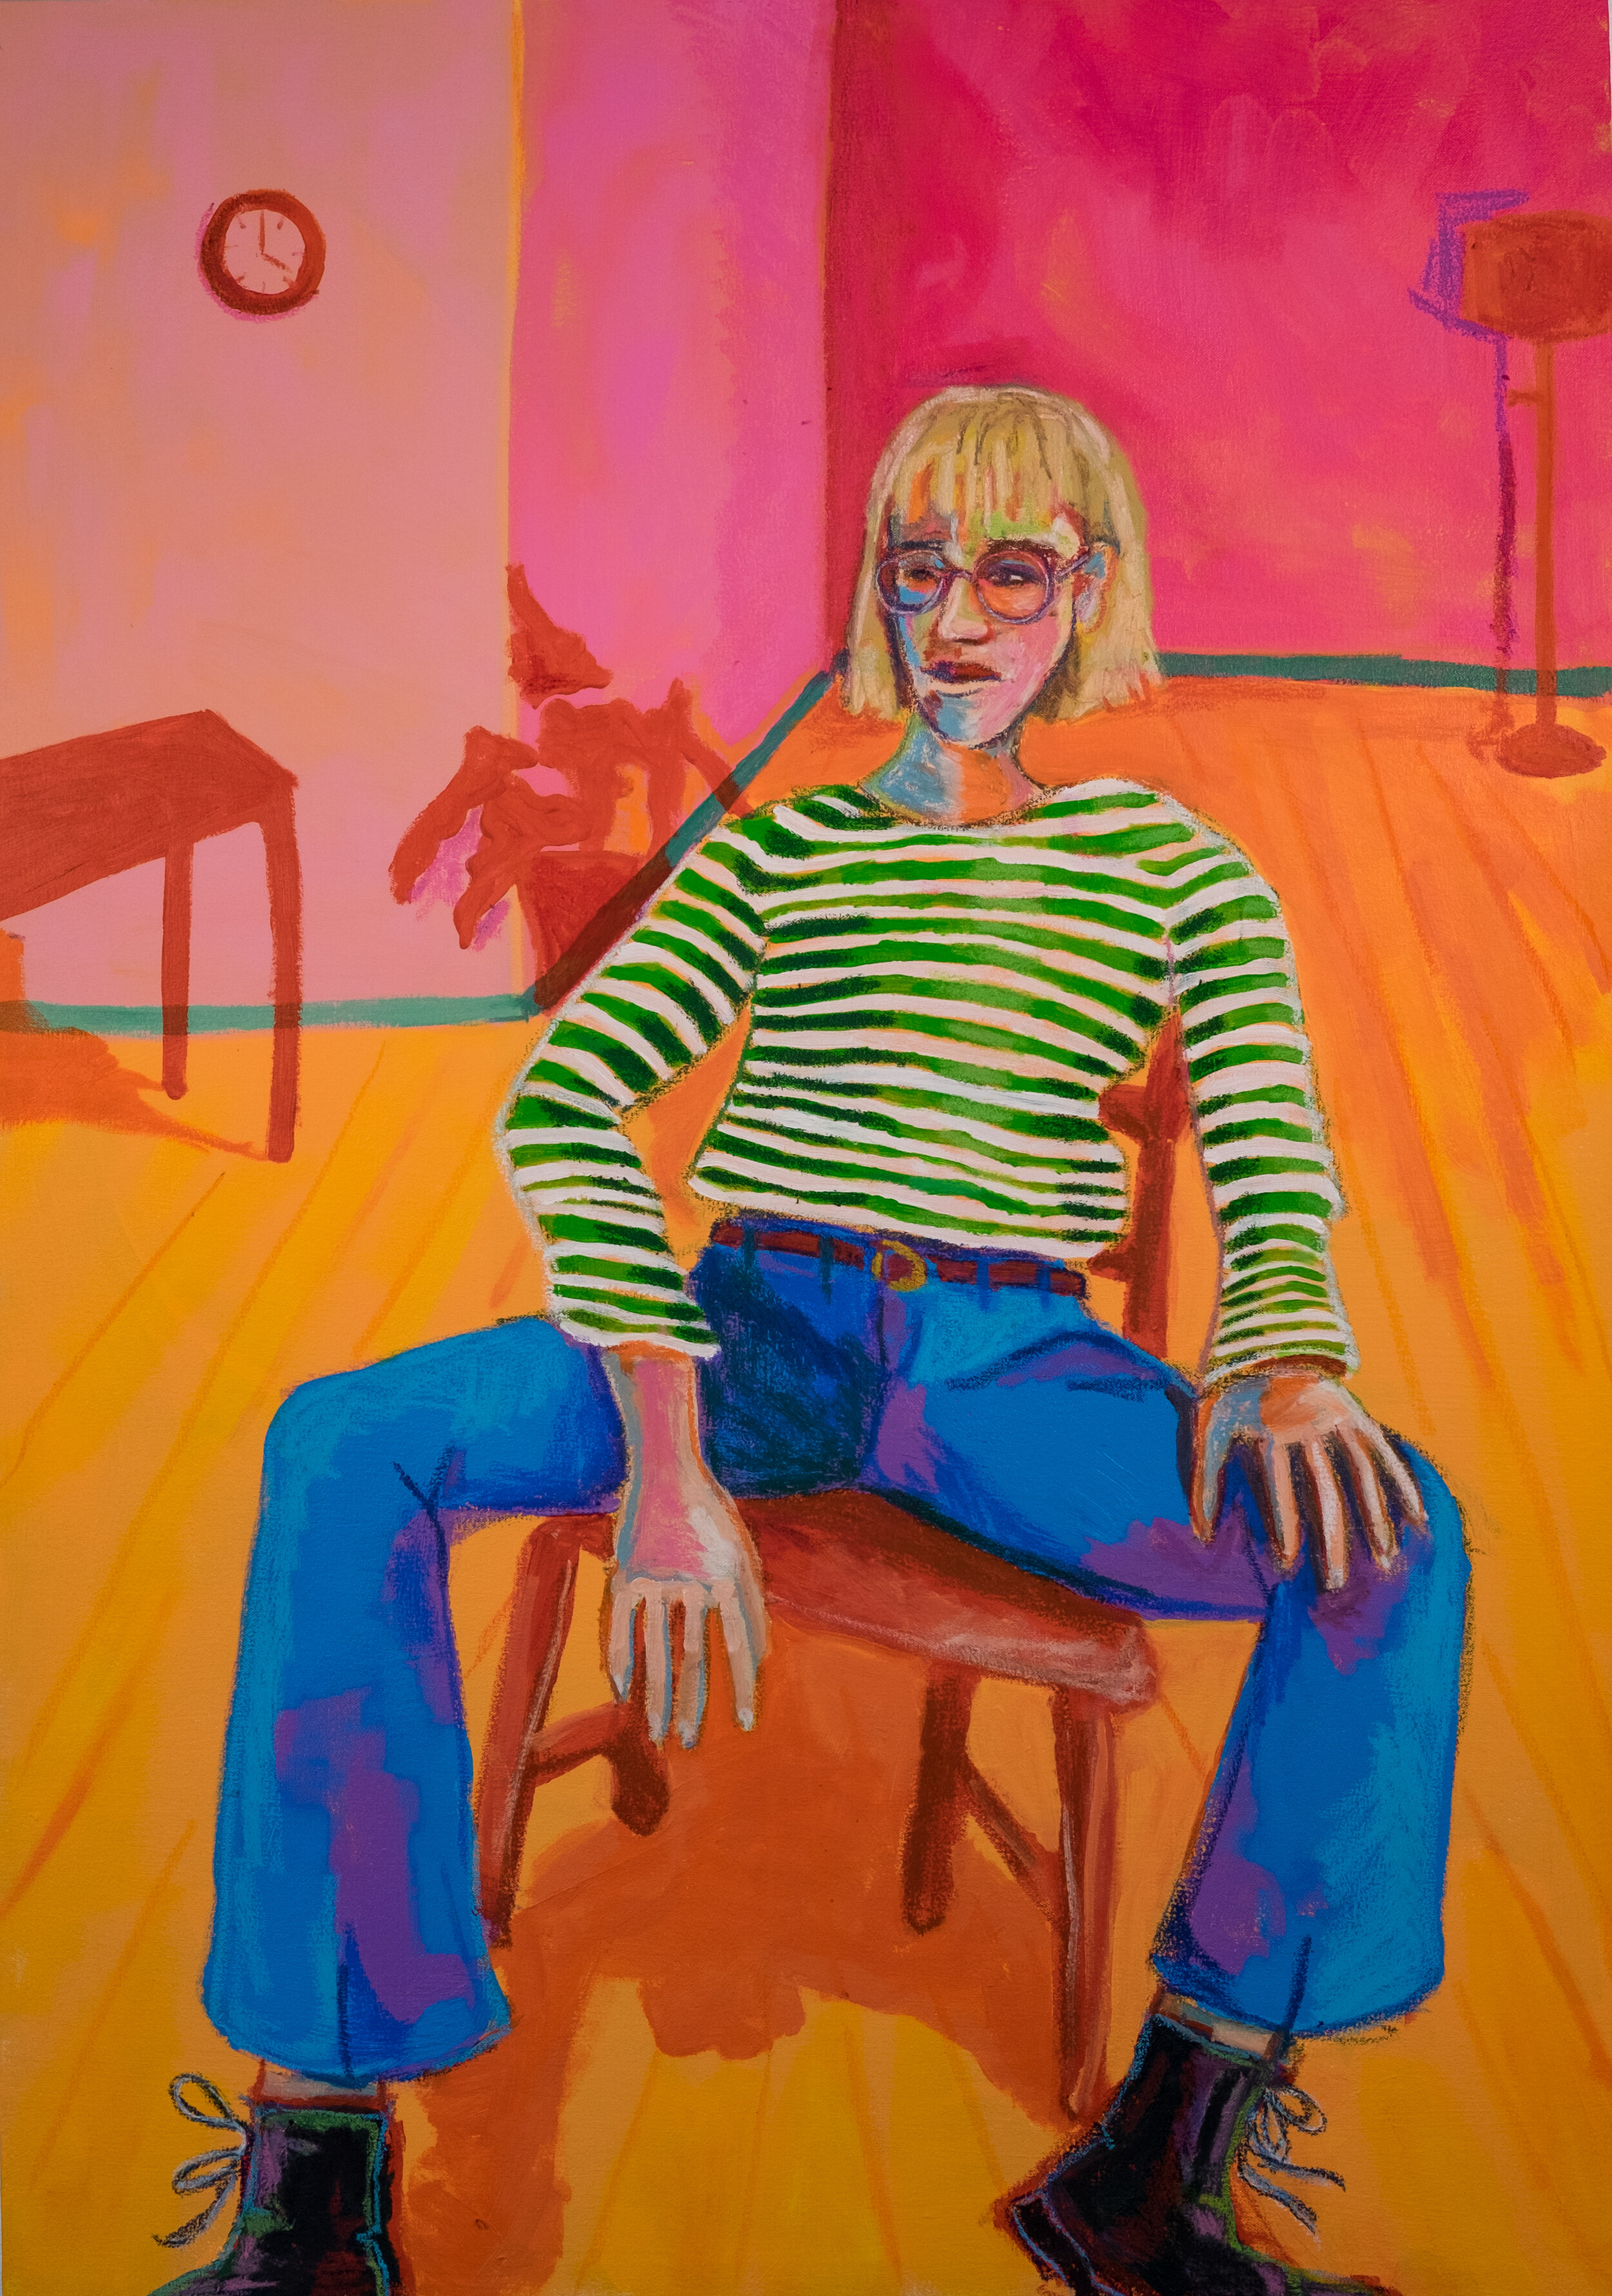   Seated in a Striped Shirt   Acrylic Paint and Oil Pastel on Canvas  2018  30 inches x 43 inches 